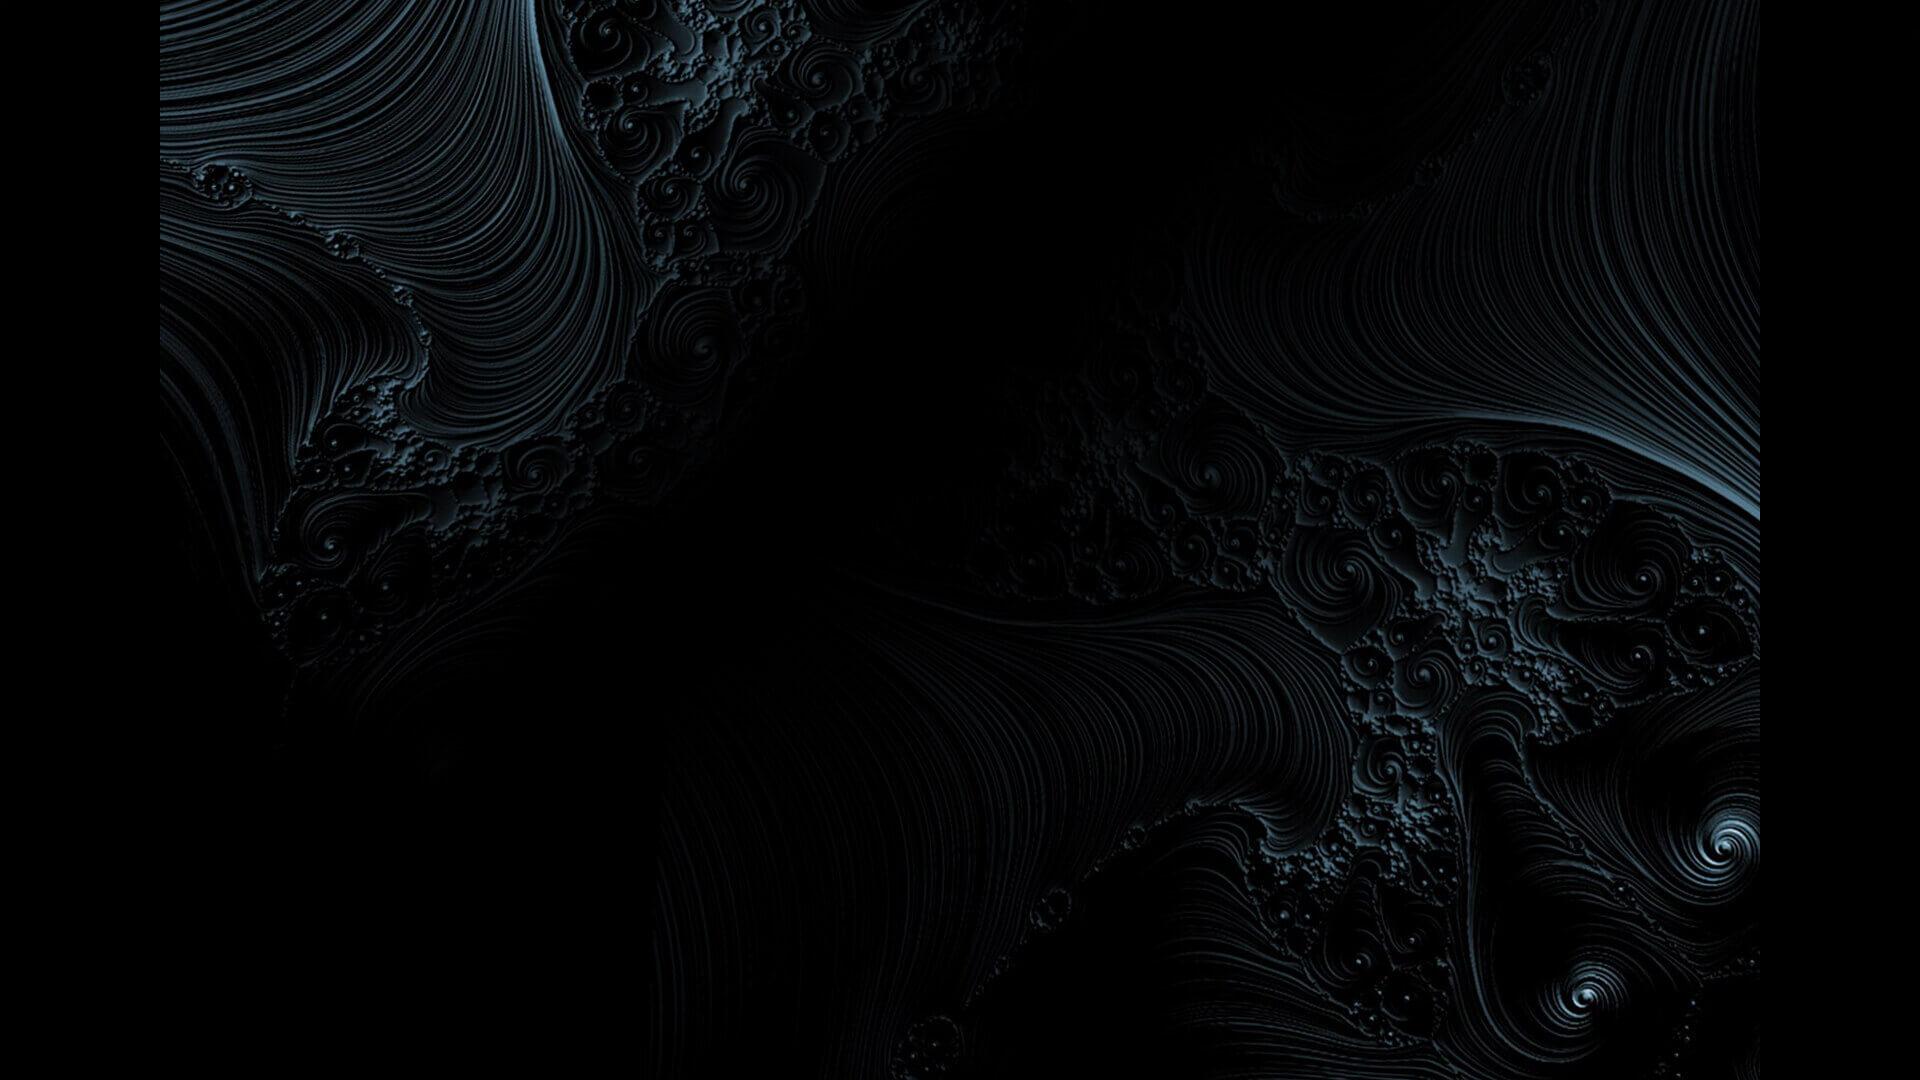 1920 x 1080 · jpeg - 20 Awesome Dark Wallpapers & Backgrounds - Blogenium - Free Wallpapers